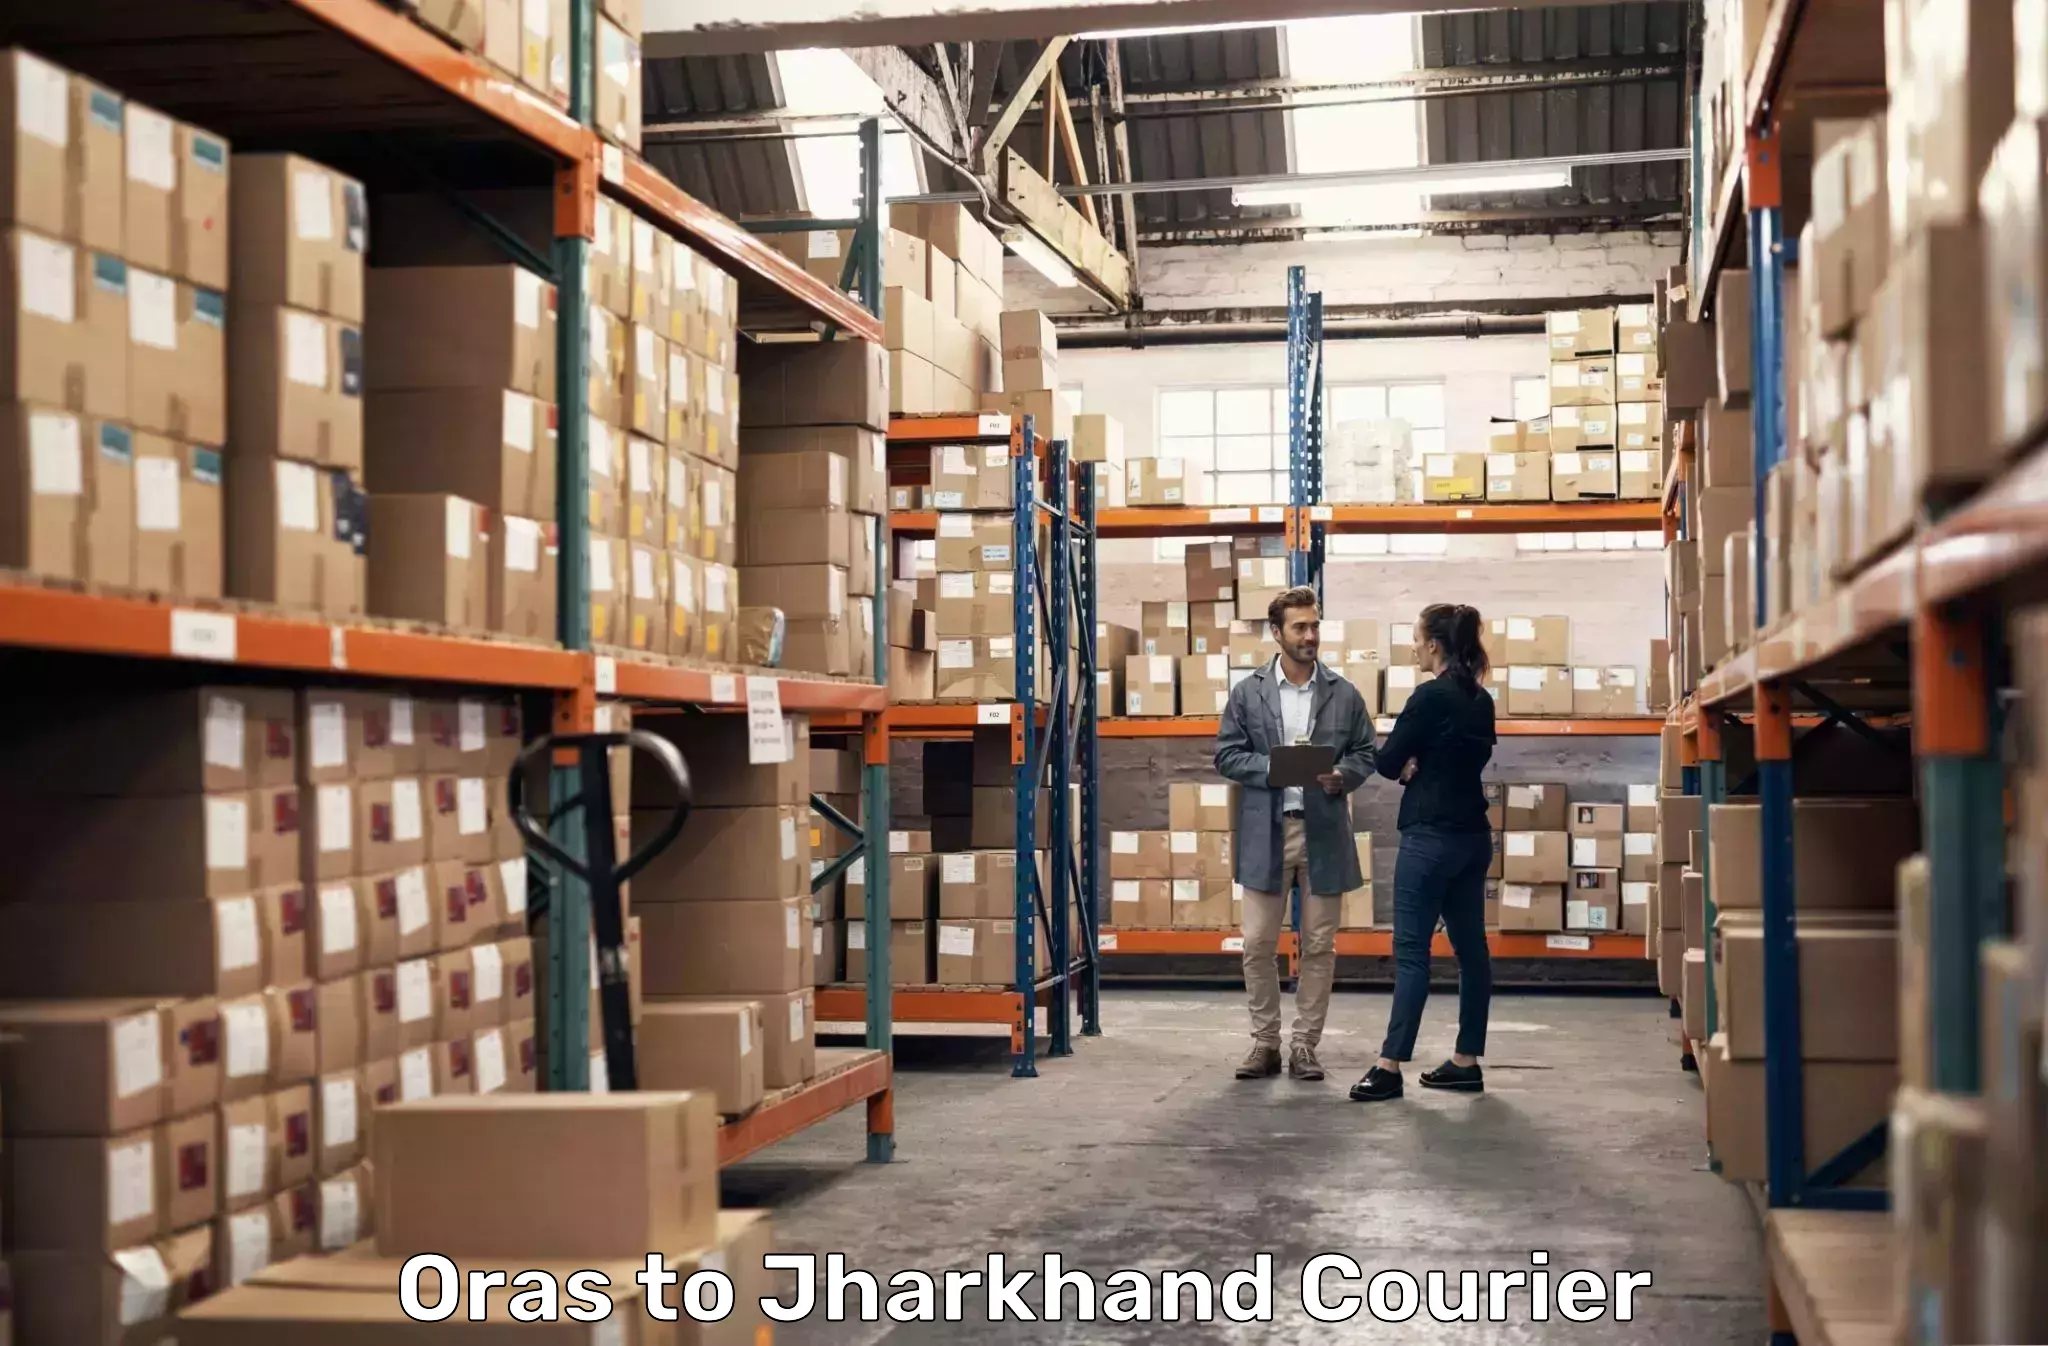 Nationwide shipping coverage Oras to Dhanbad